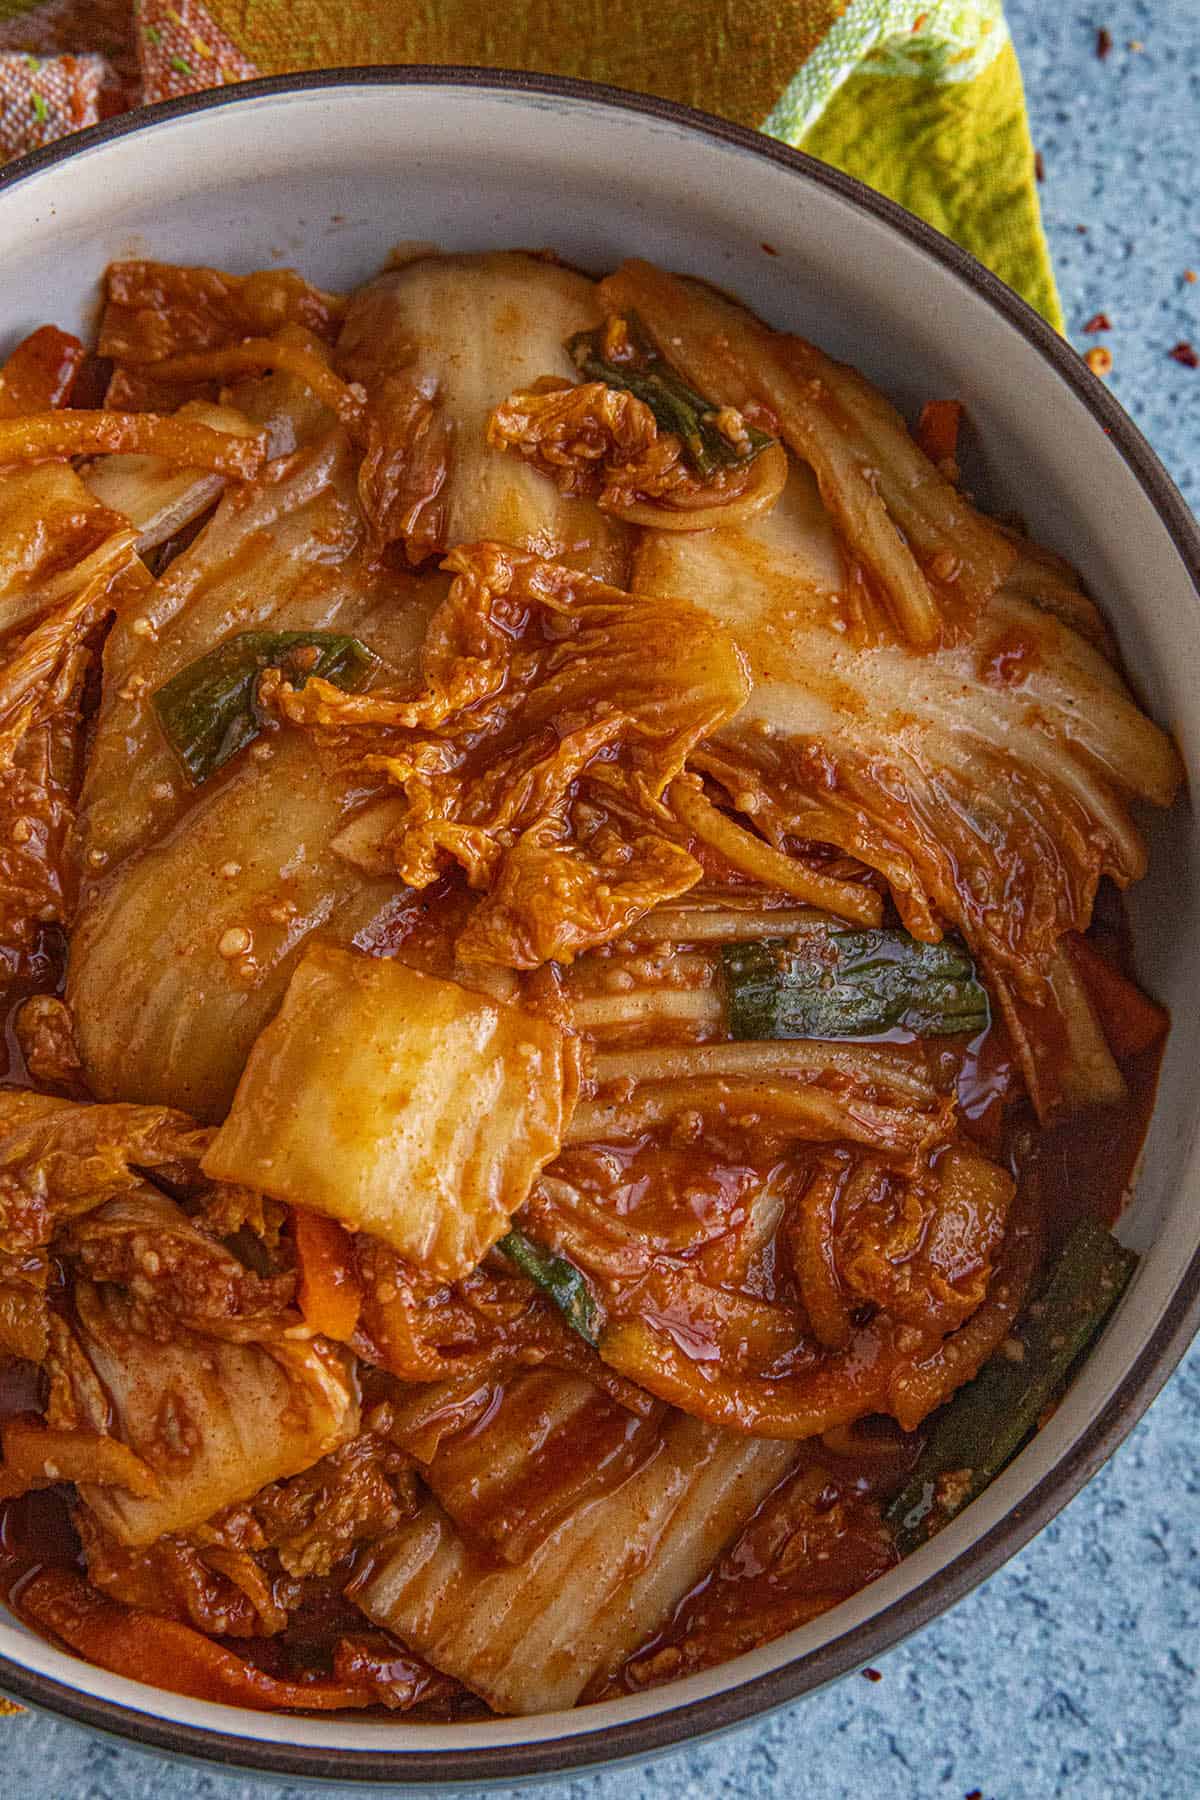 Learn how to make kimchi at home with this kimchi recipe, including